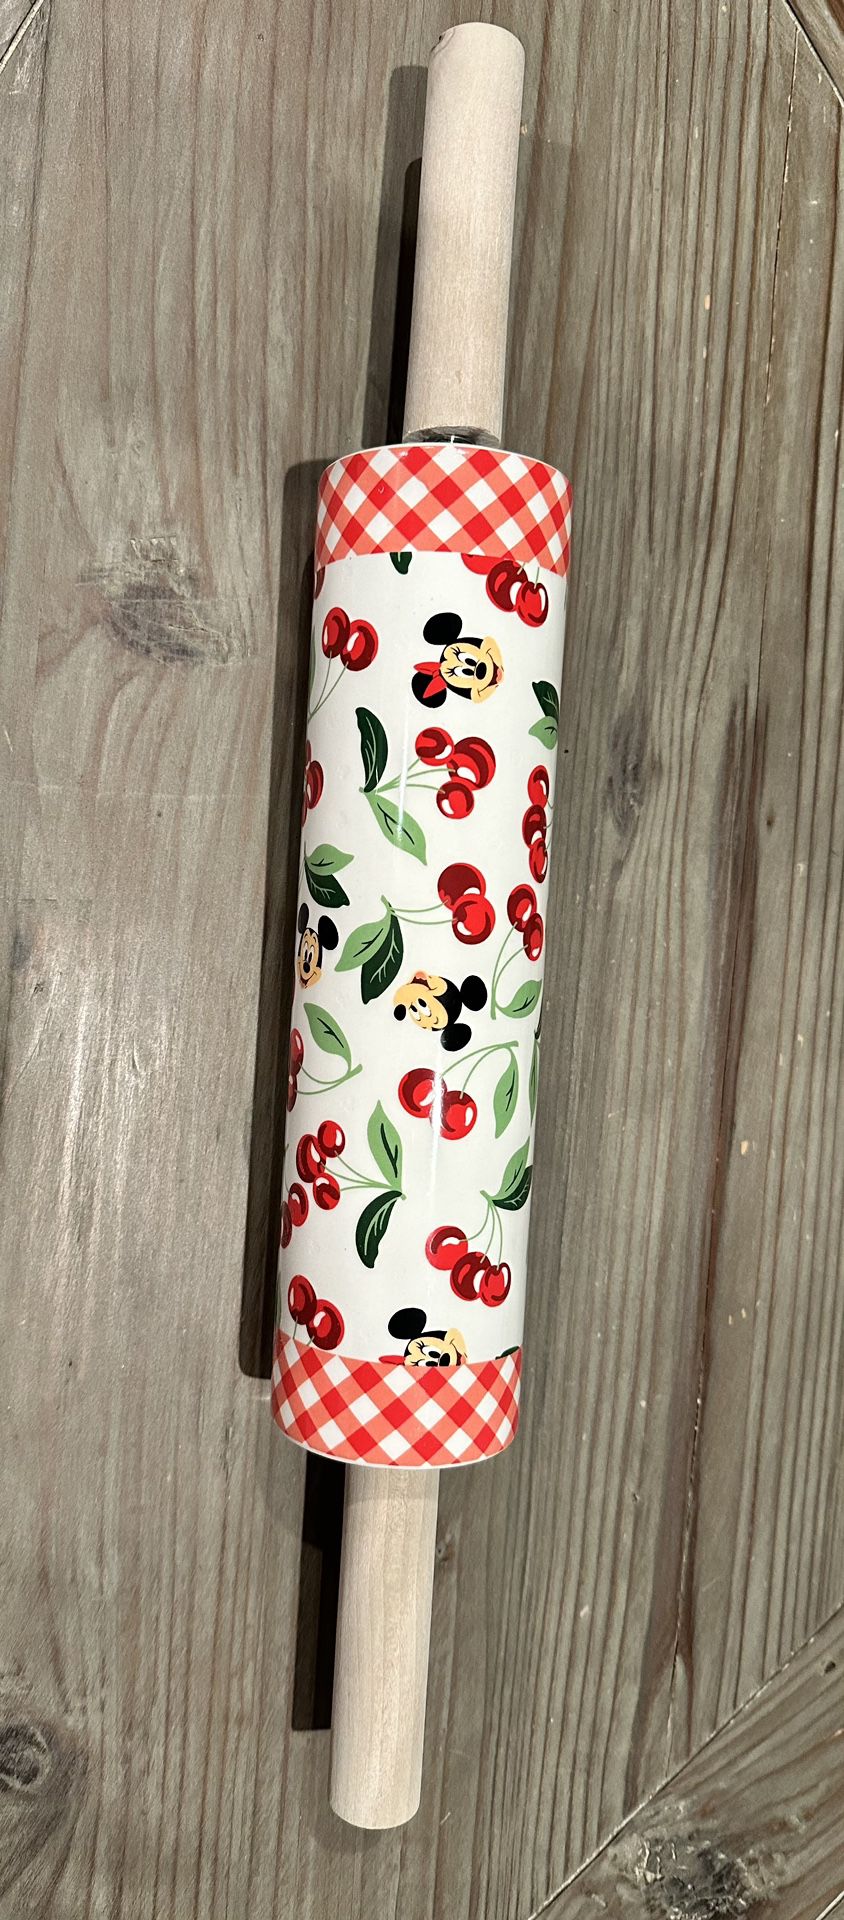 Disney Mickey and Minnie Mouse Rolling pin 